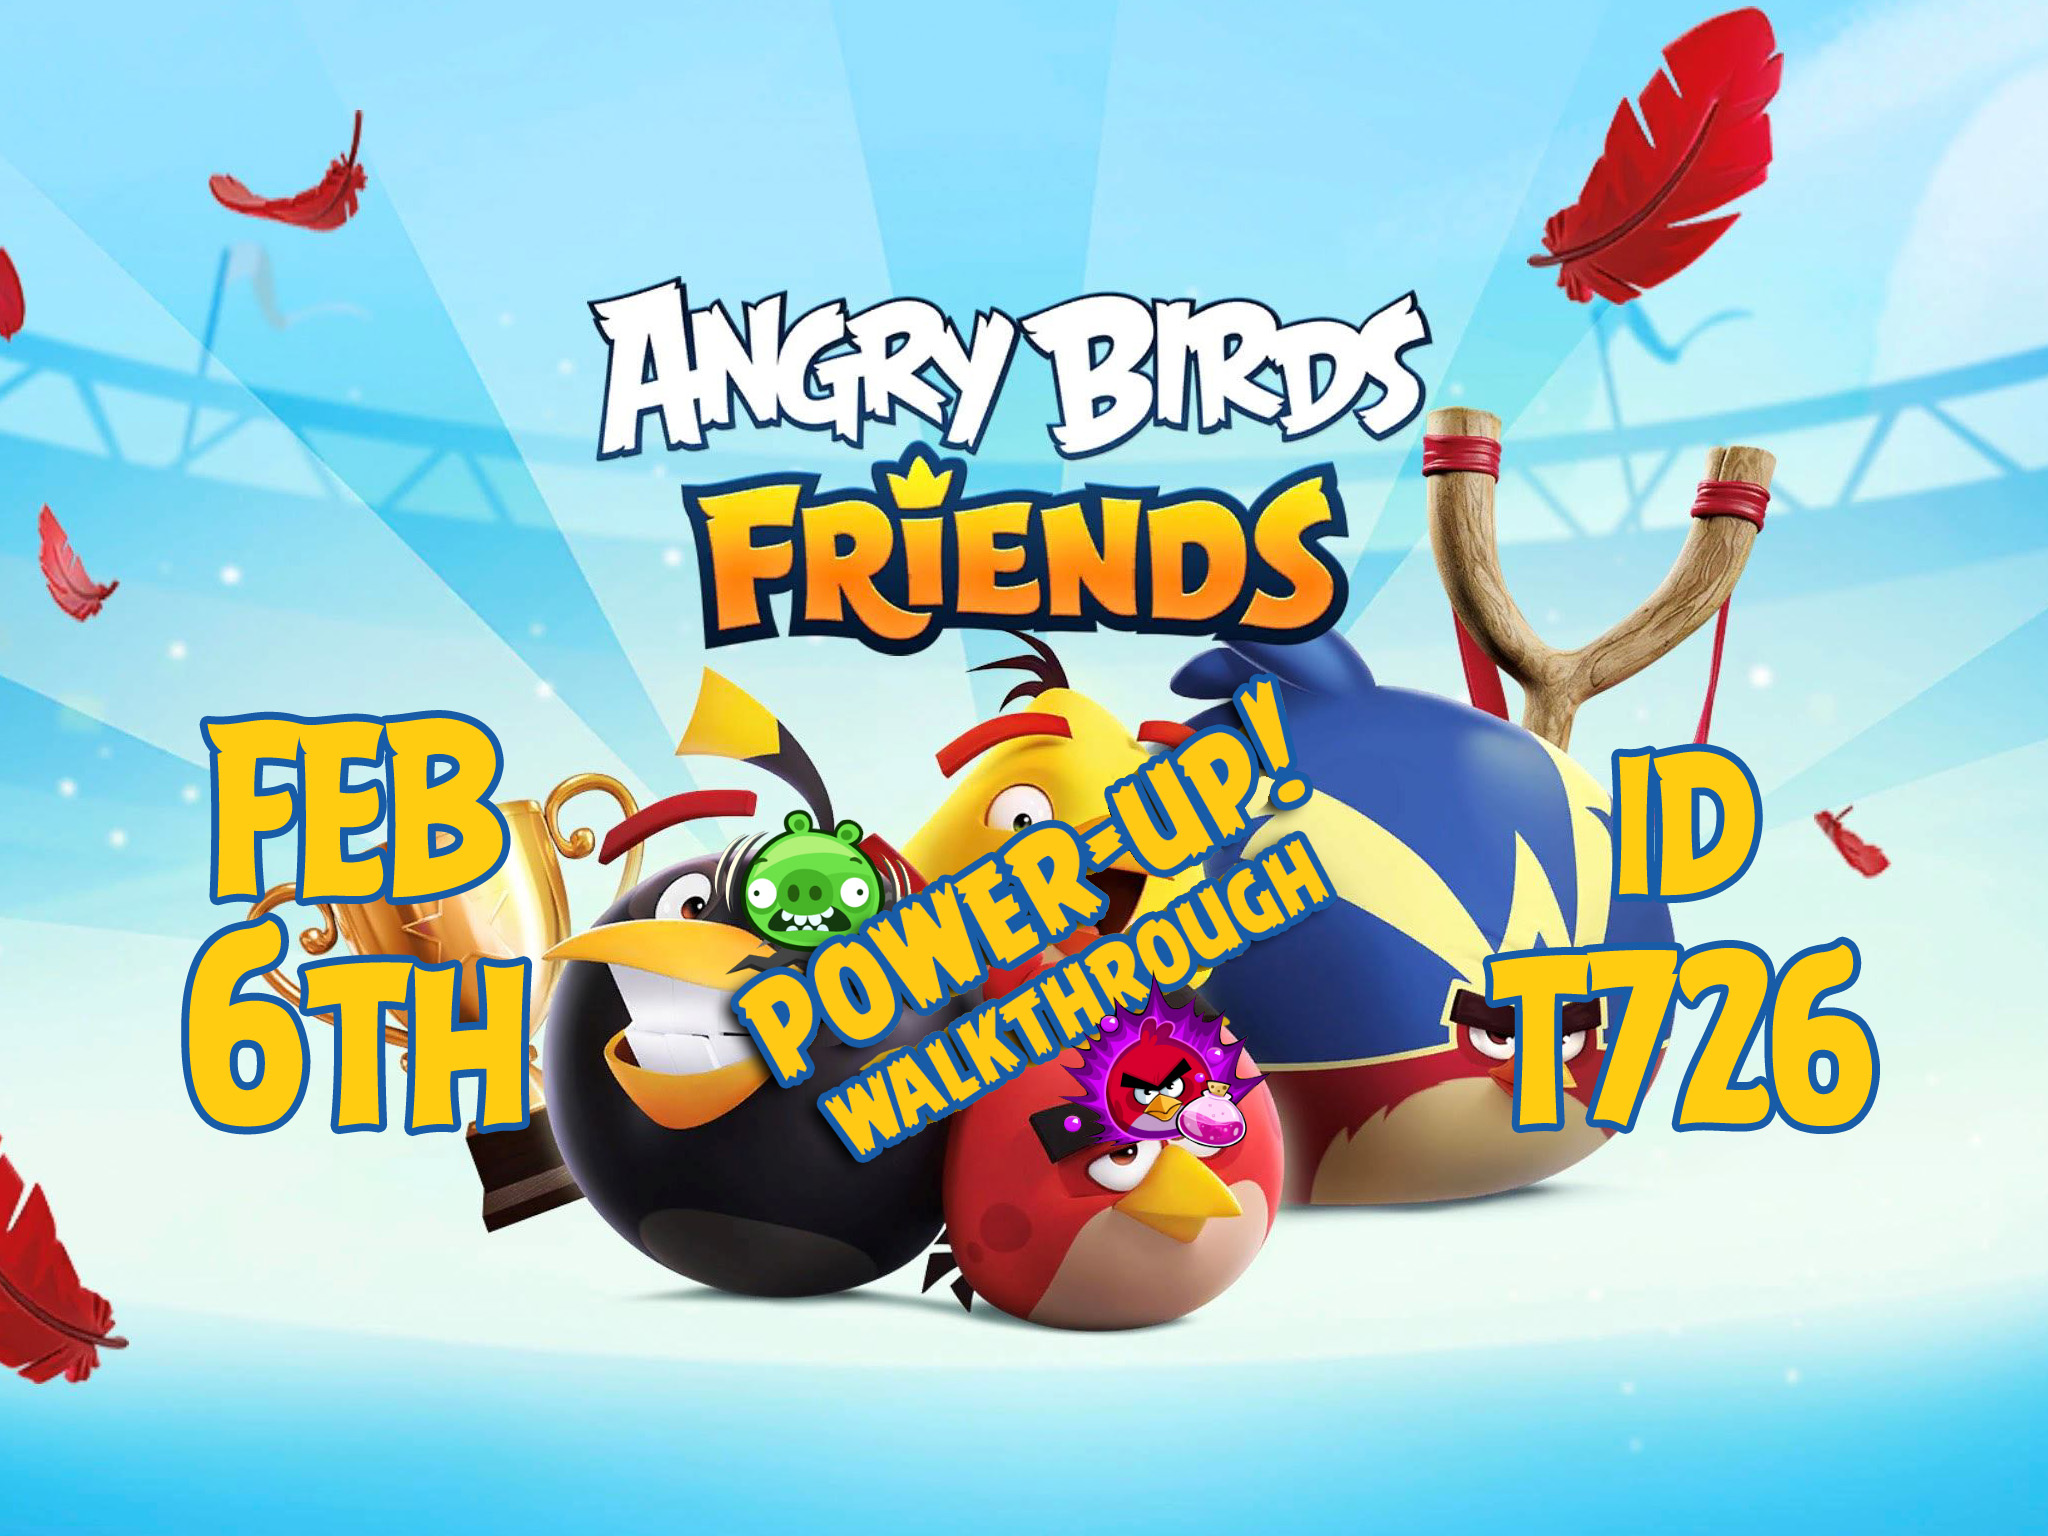 Angry-Birds-Friends-Tournament-T726-Feature-Image-PU